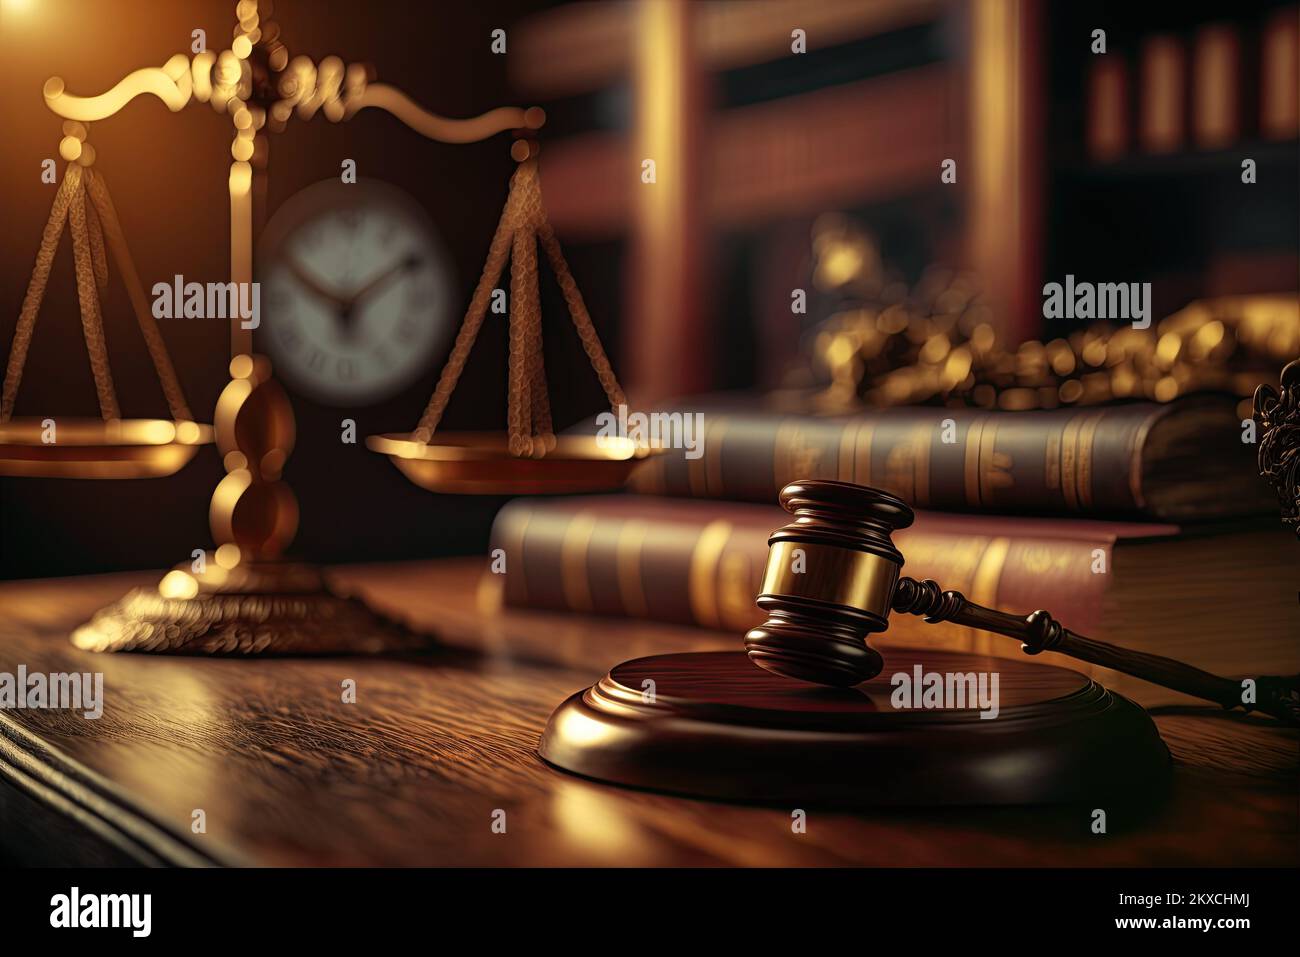 A close-up of a wooden lawyer table with a judge's gavel and a golden weight scale. Blurred shelves of a library in the background. it conveys the Stock Photo